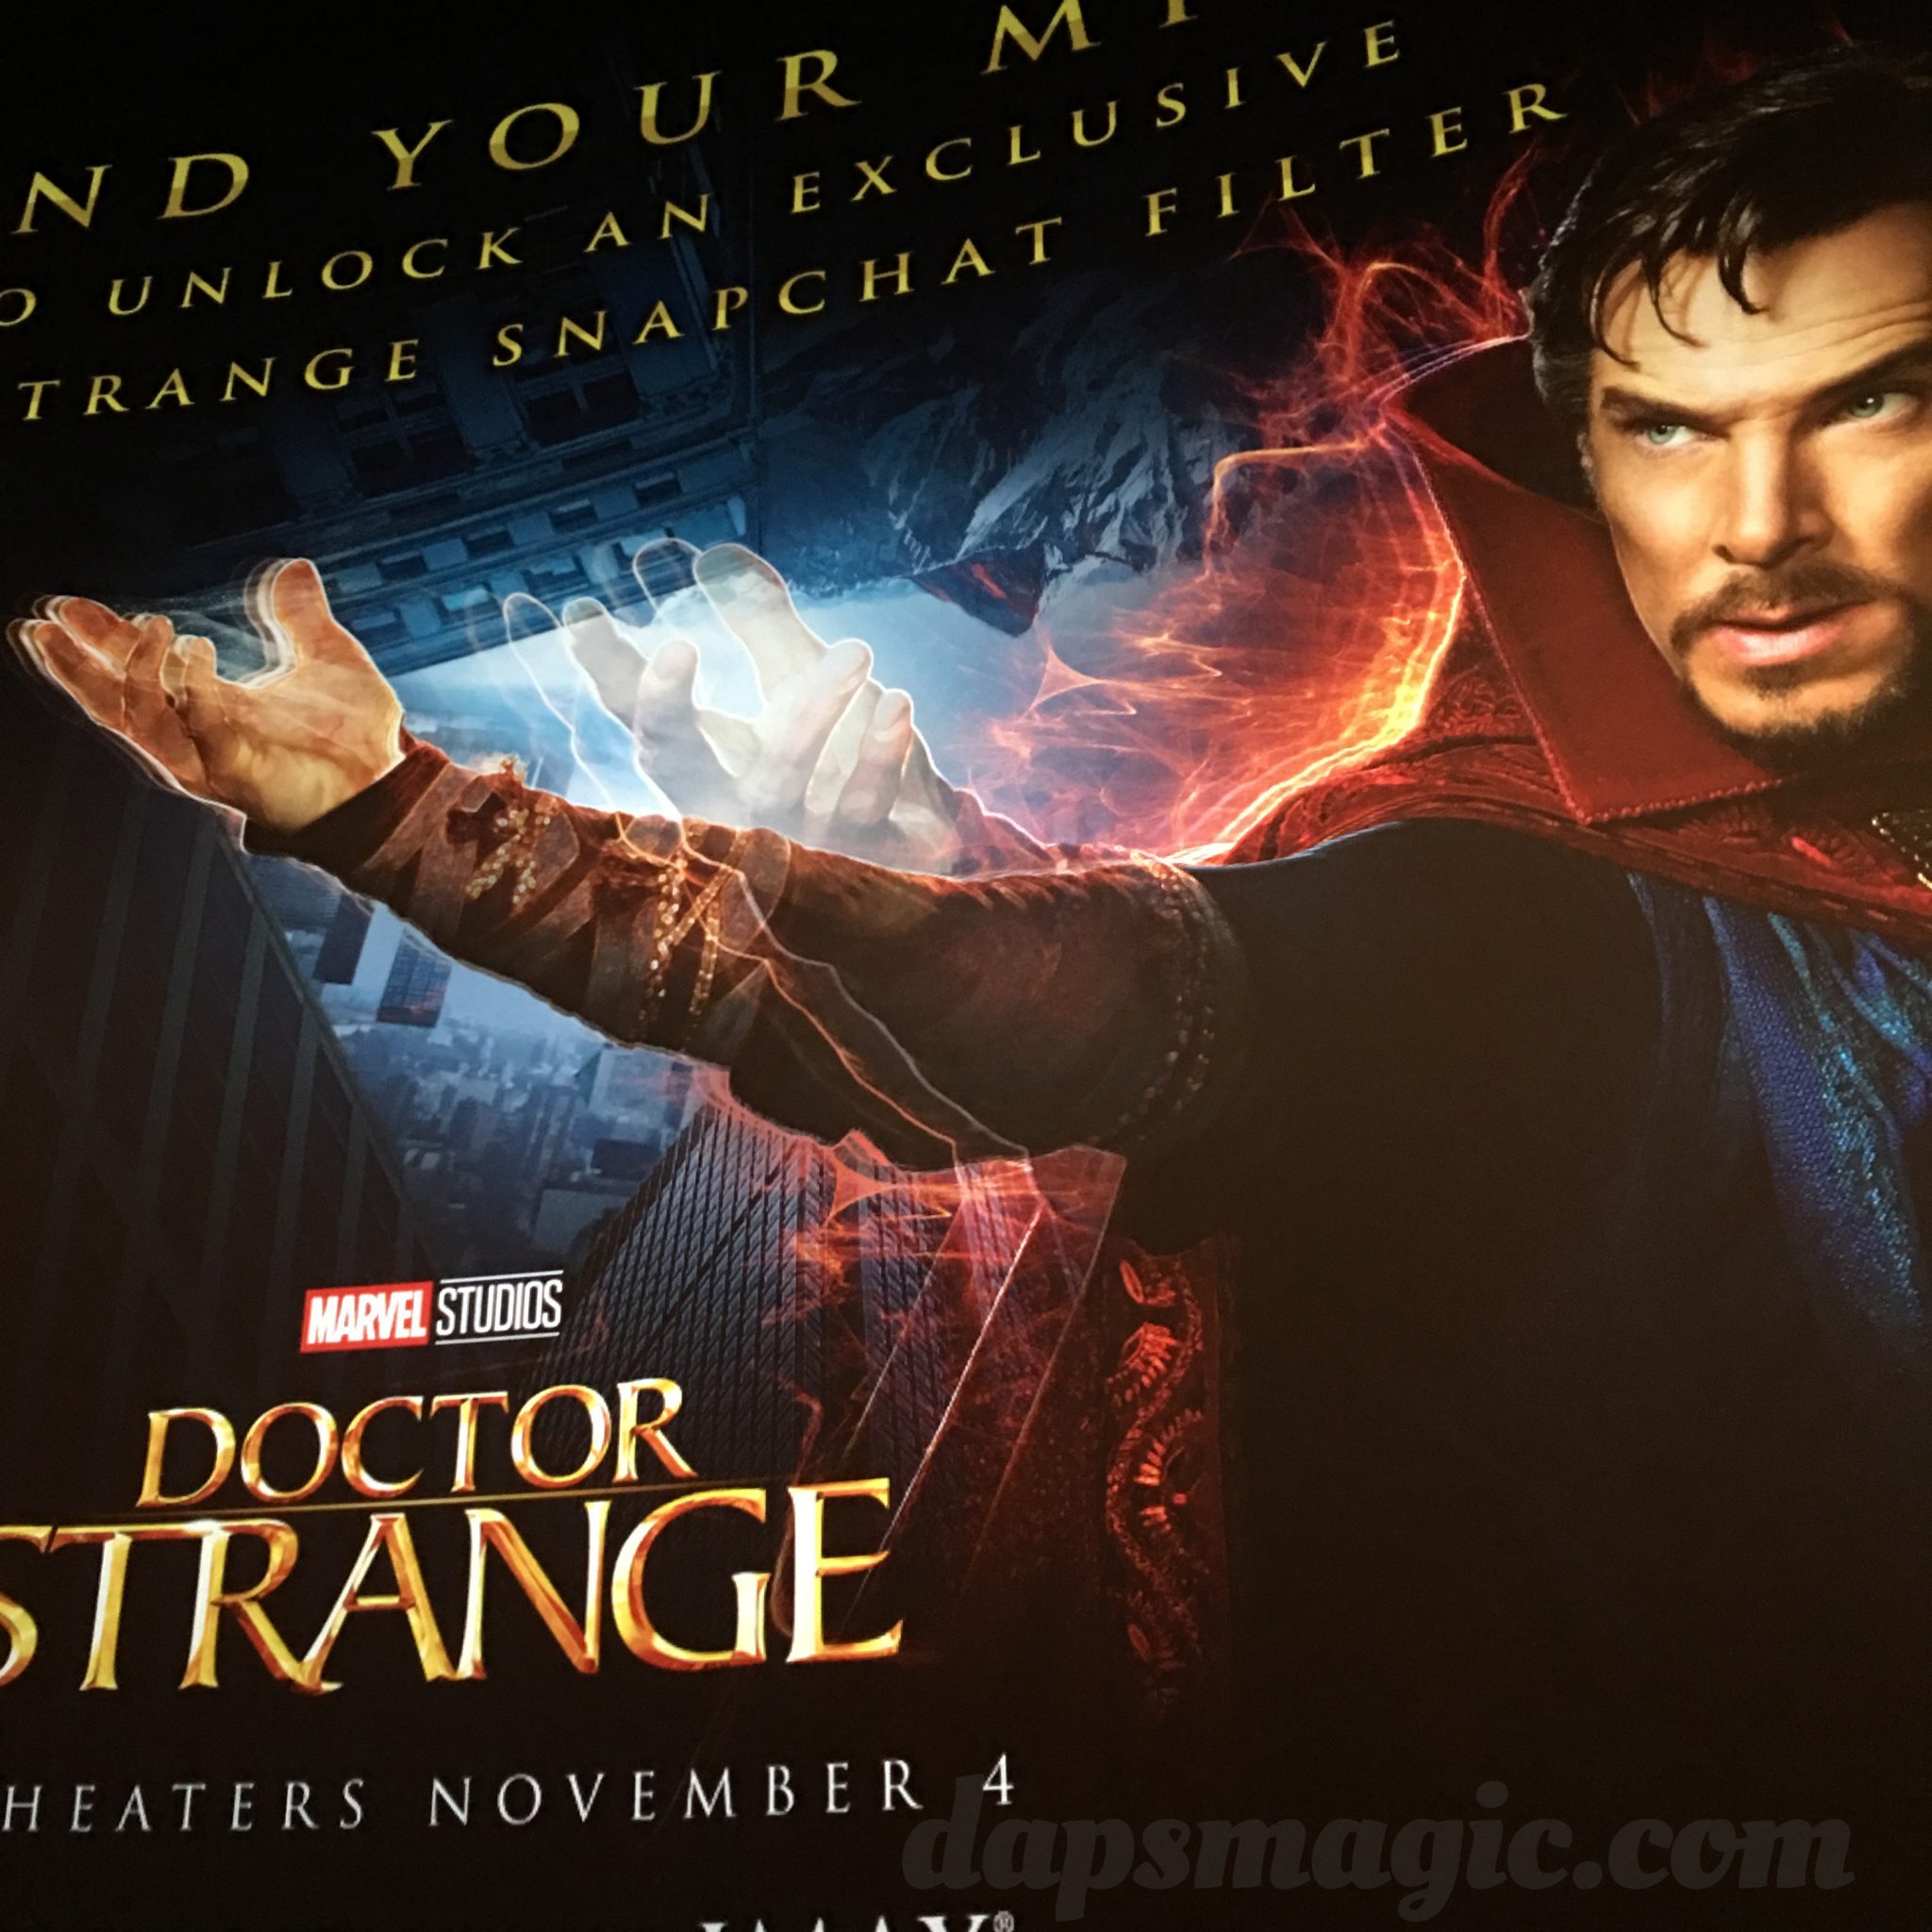 Why IMAX 3D Will Be The Way To Watch Doctor Strange